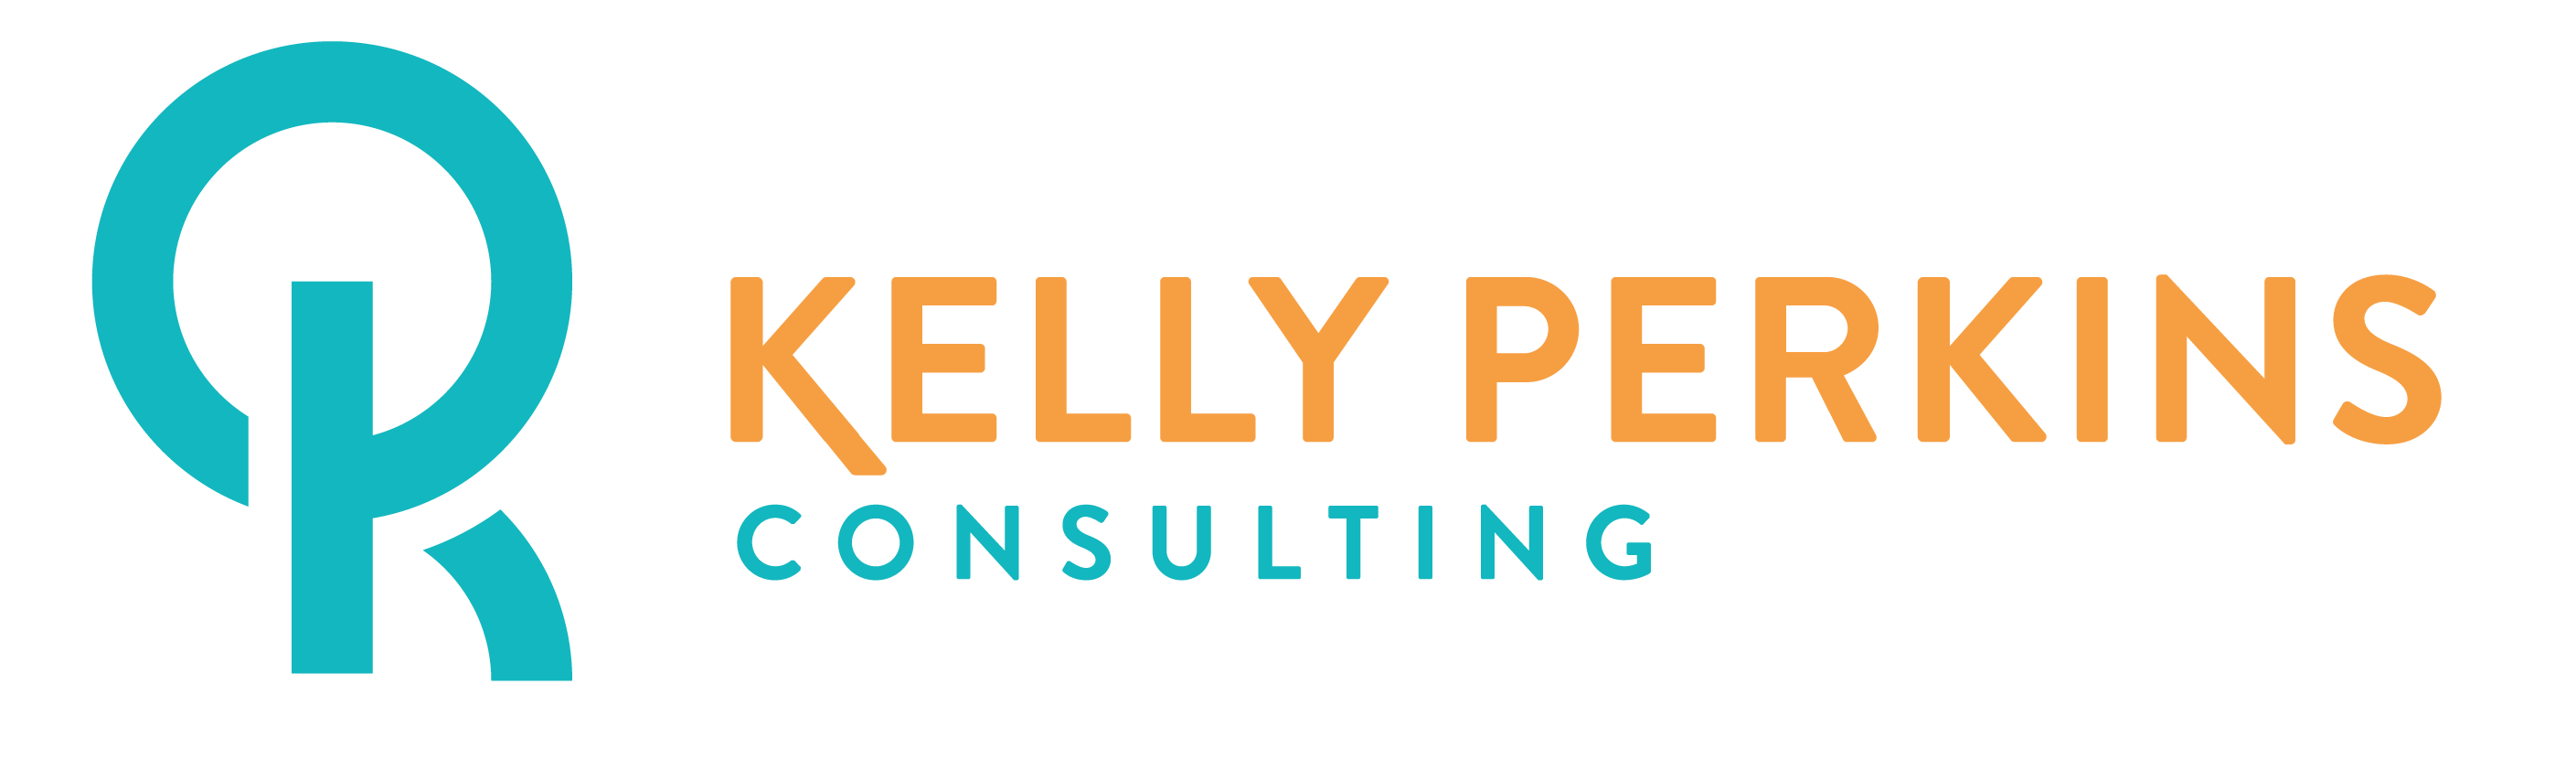 Kelly Perkins Consulting